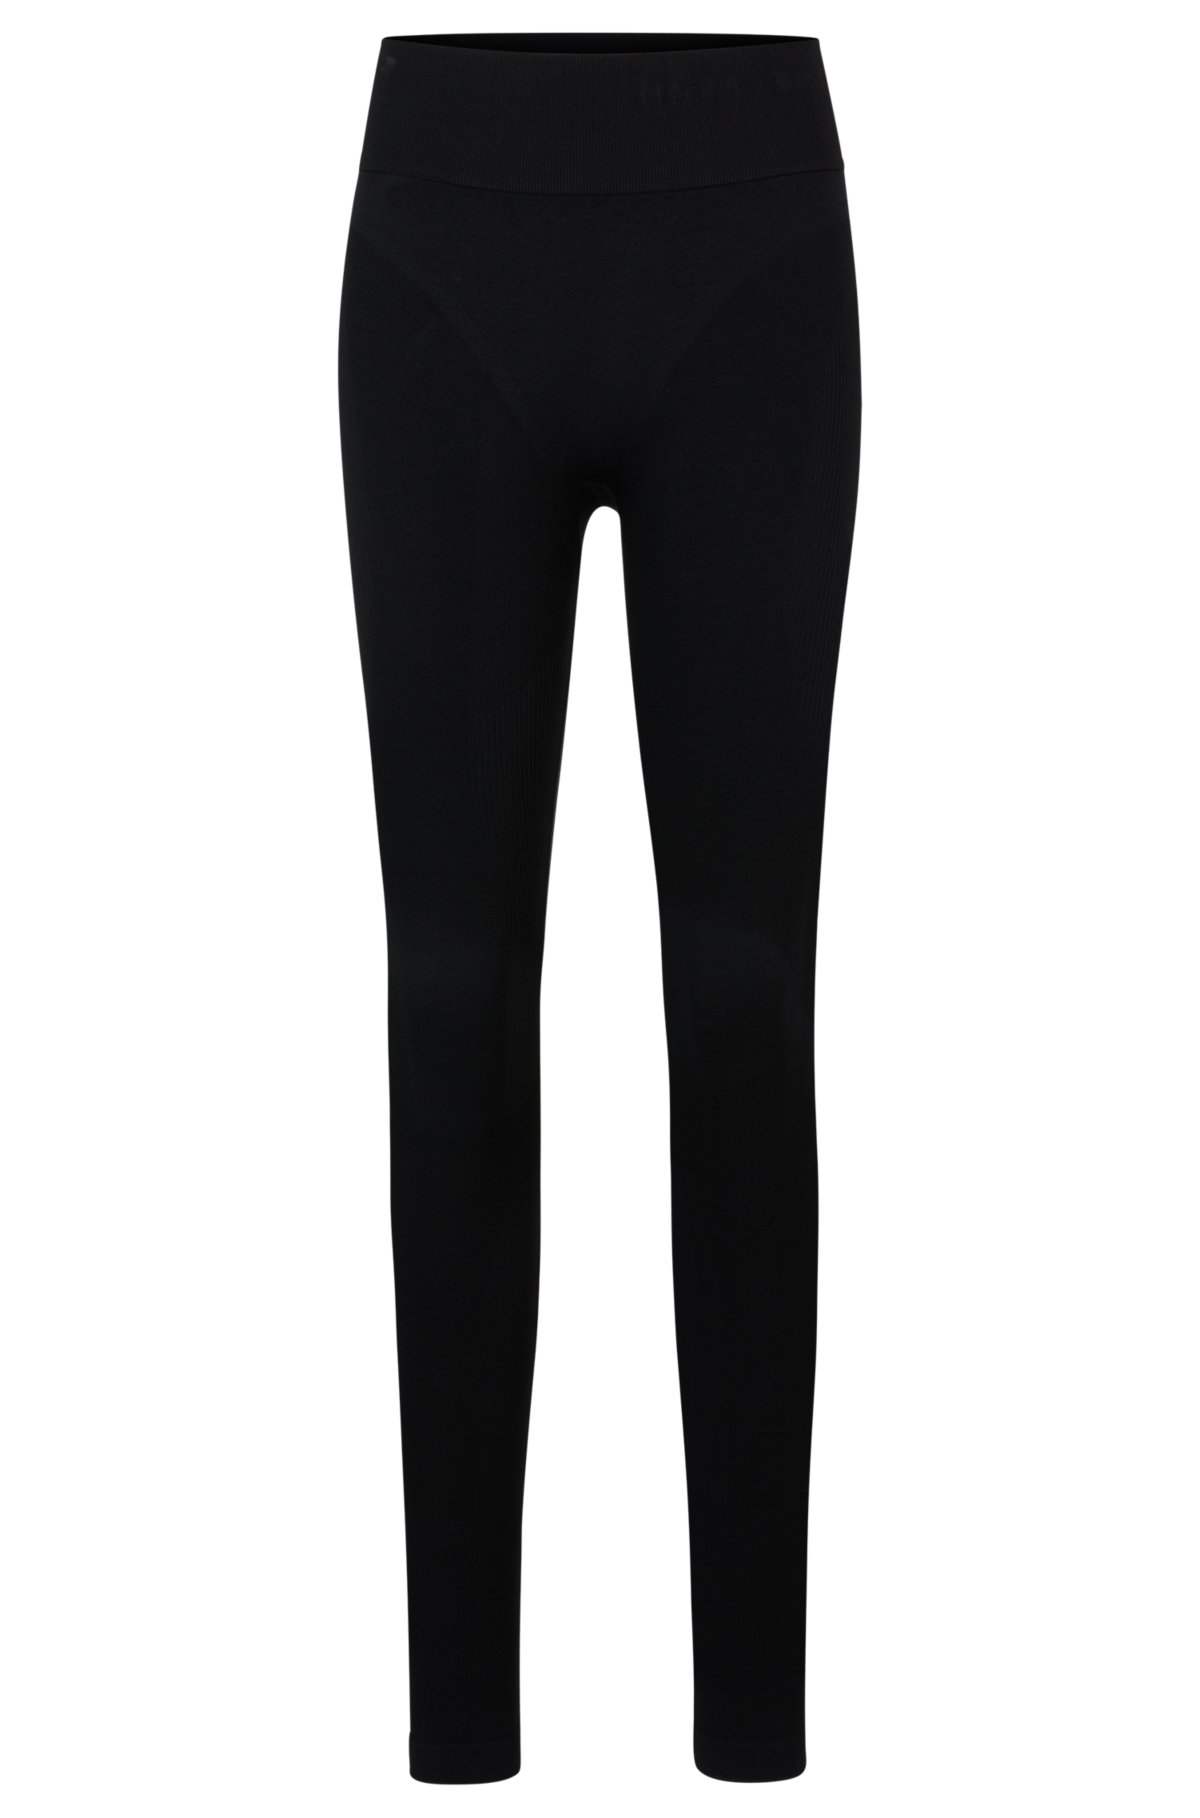 NAOMI x BOSS stretch-jersey leggings with branded waistband, Black